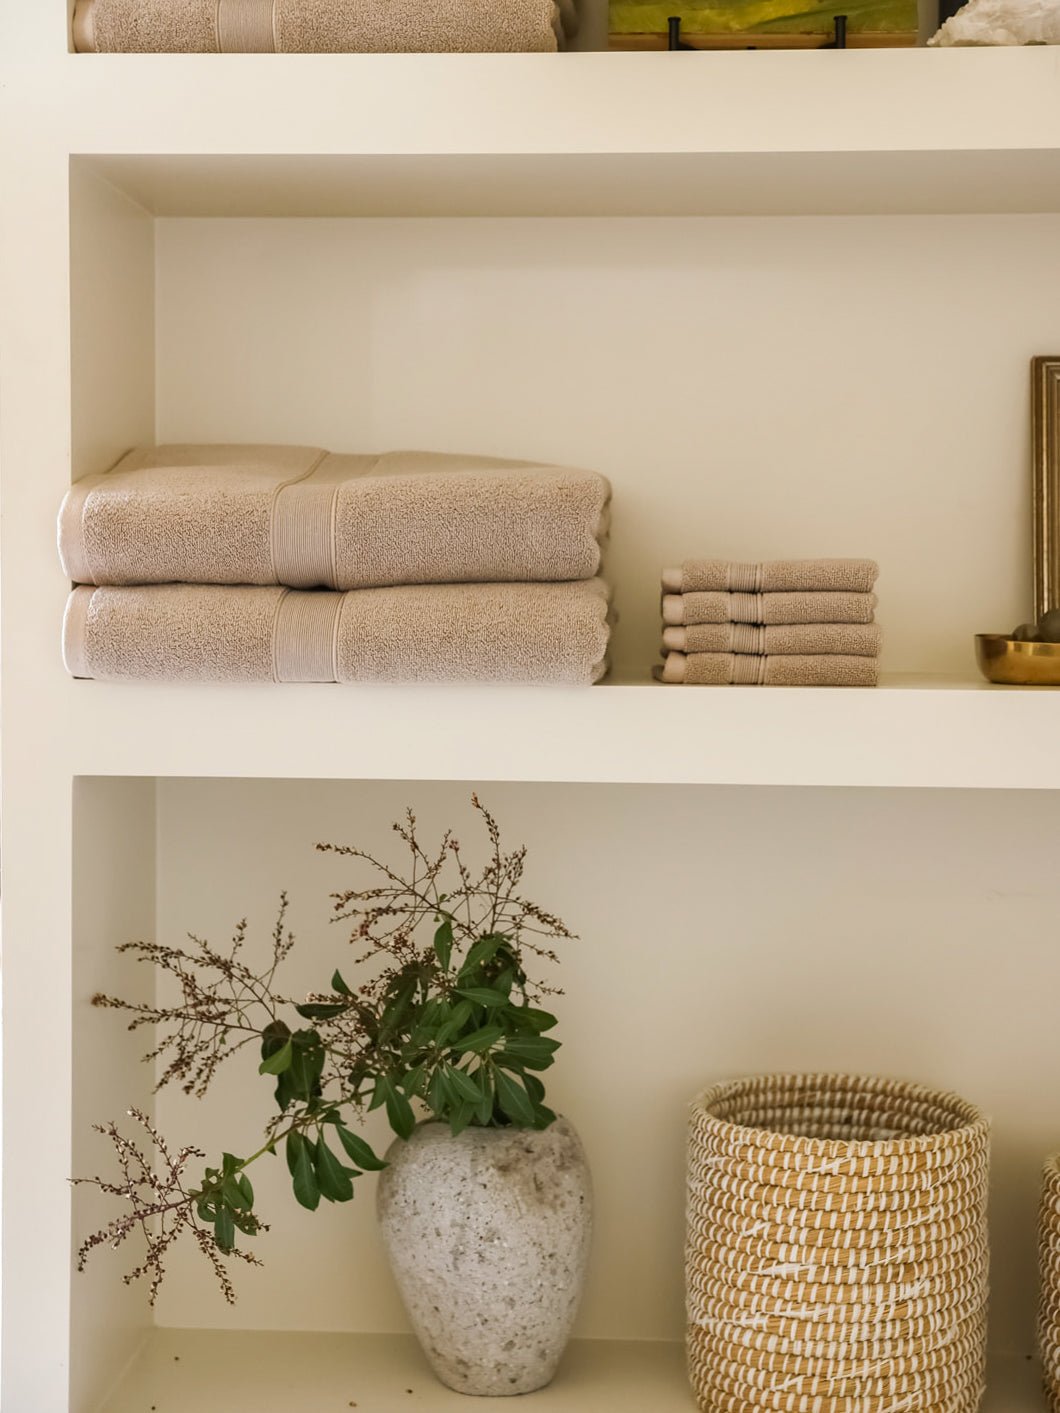 Sand luxe bath towels and washcloths folded on shelf 